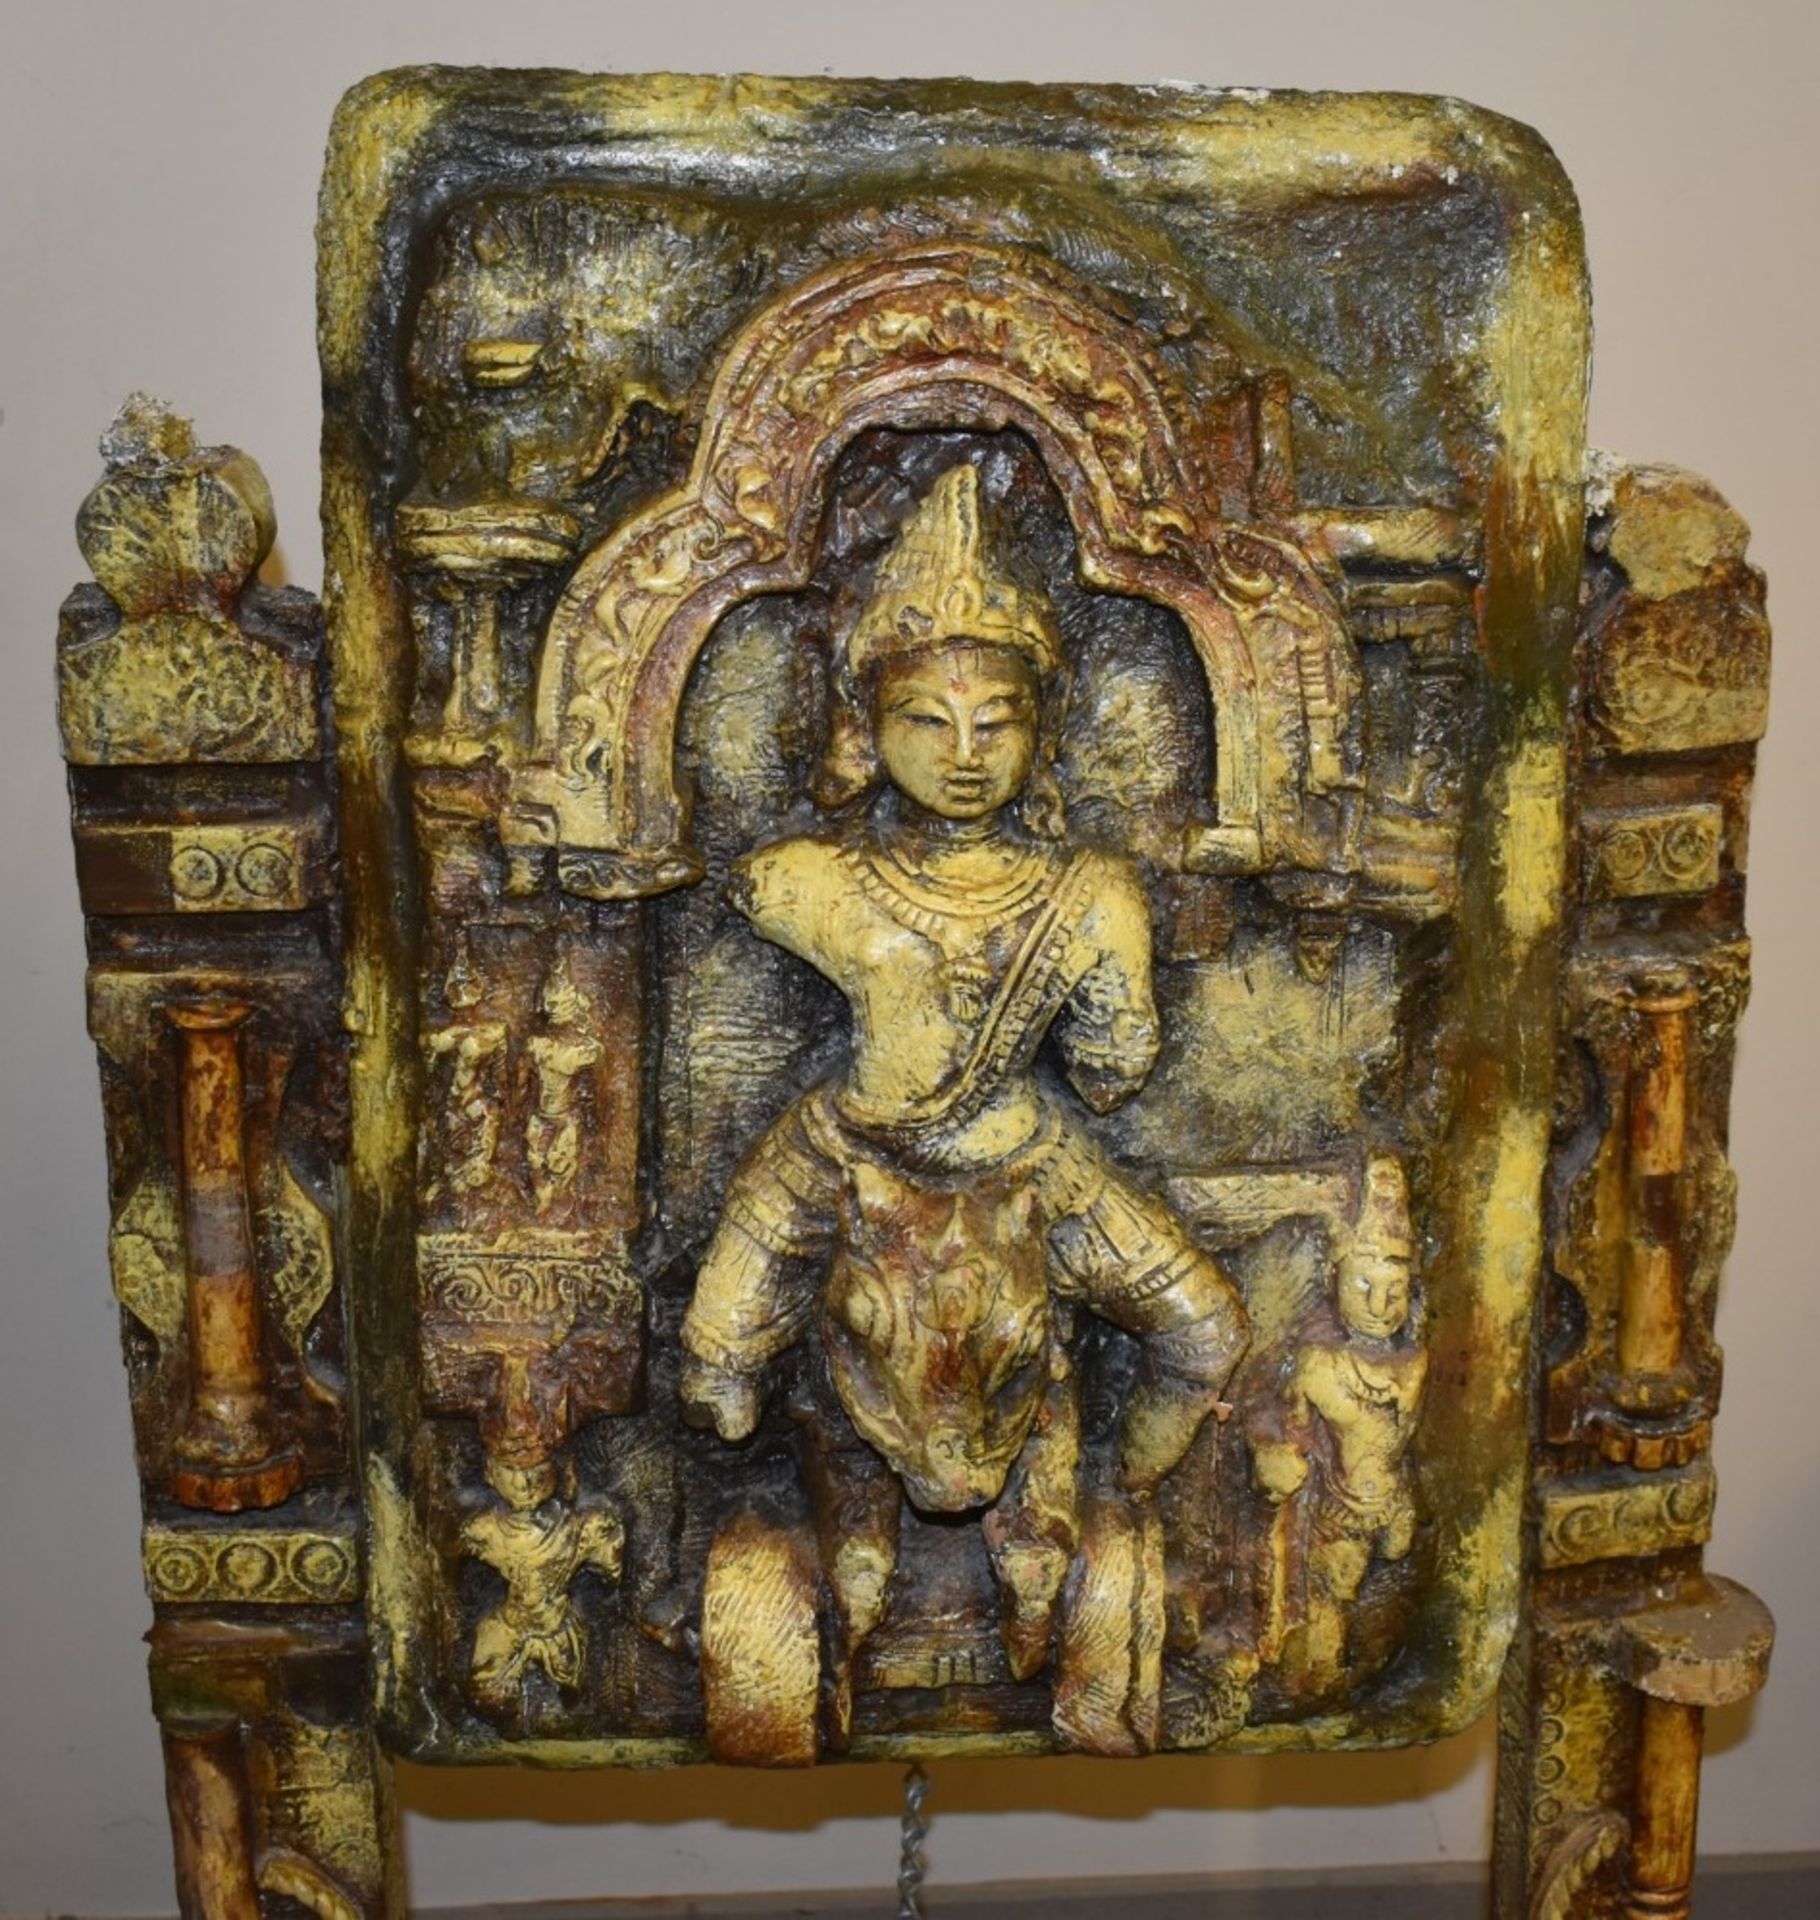 1 x Vintage Hindu Religious Freestanding Plaque - Stunning Ornate Piece - From an Exclusive Hale - Image 10 of 14